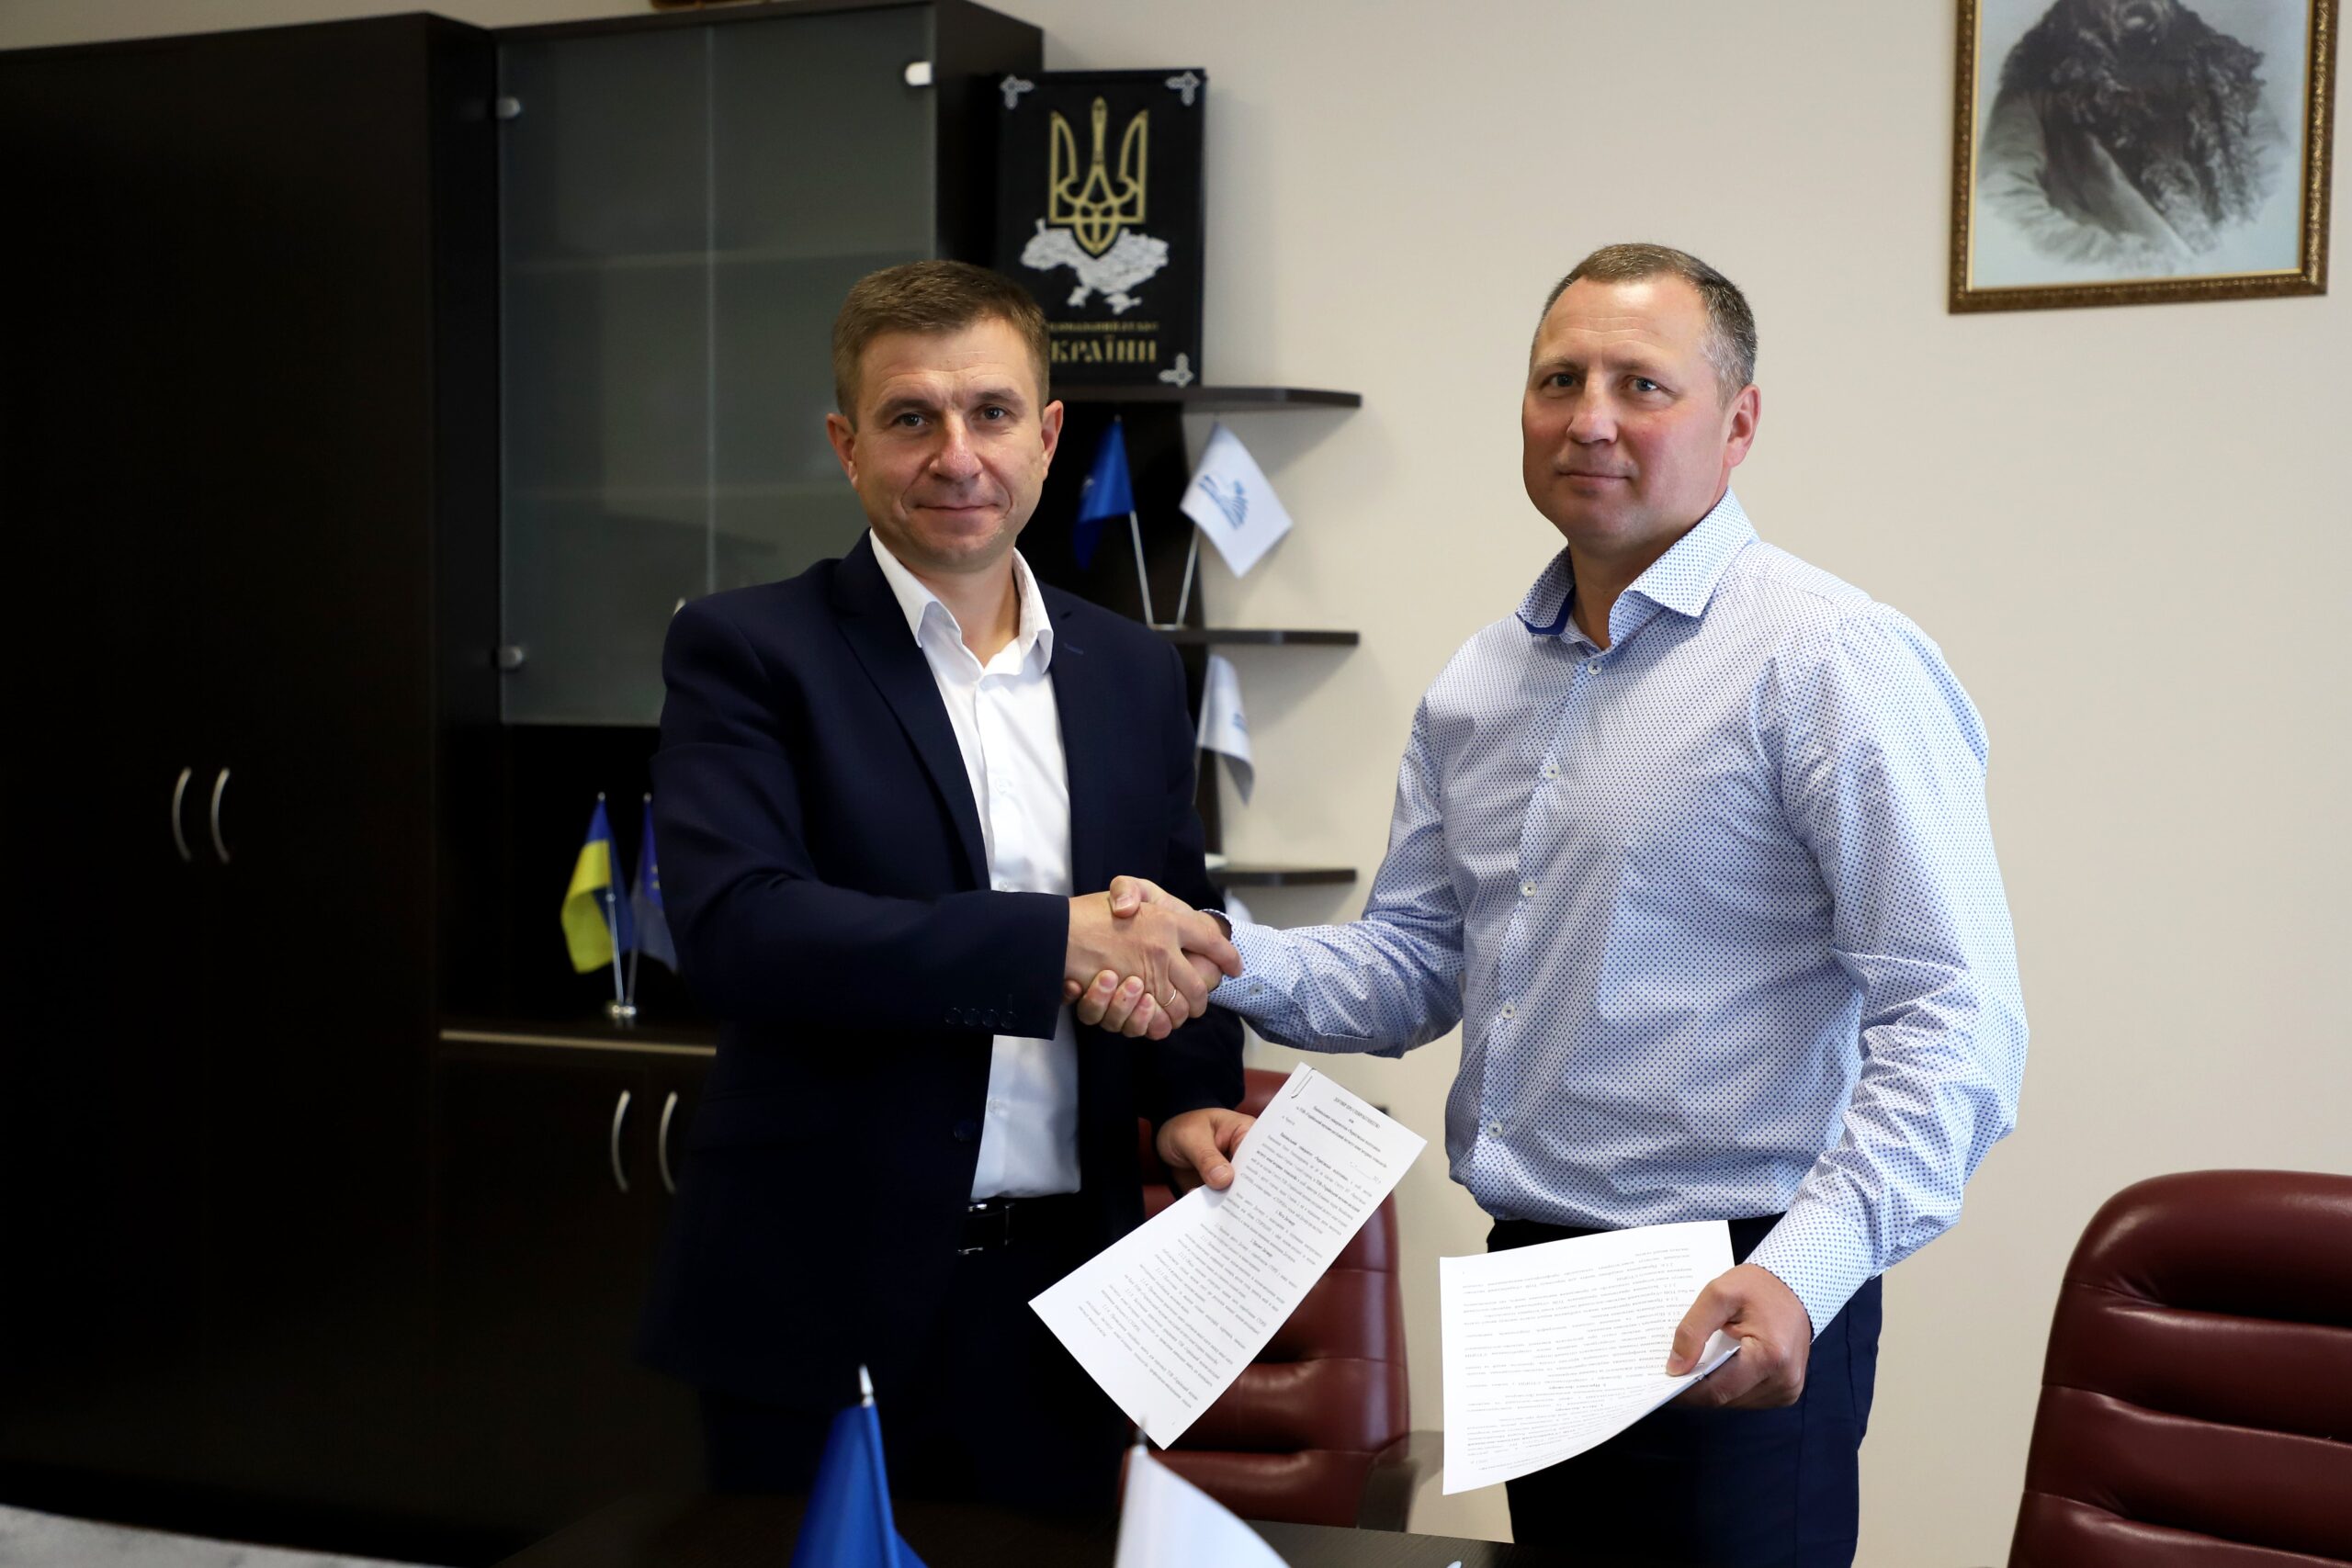 Signing the cooperation agreement between IKT and Chernihiv Polytechnic National University